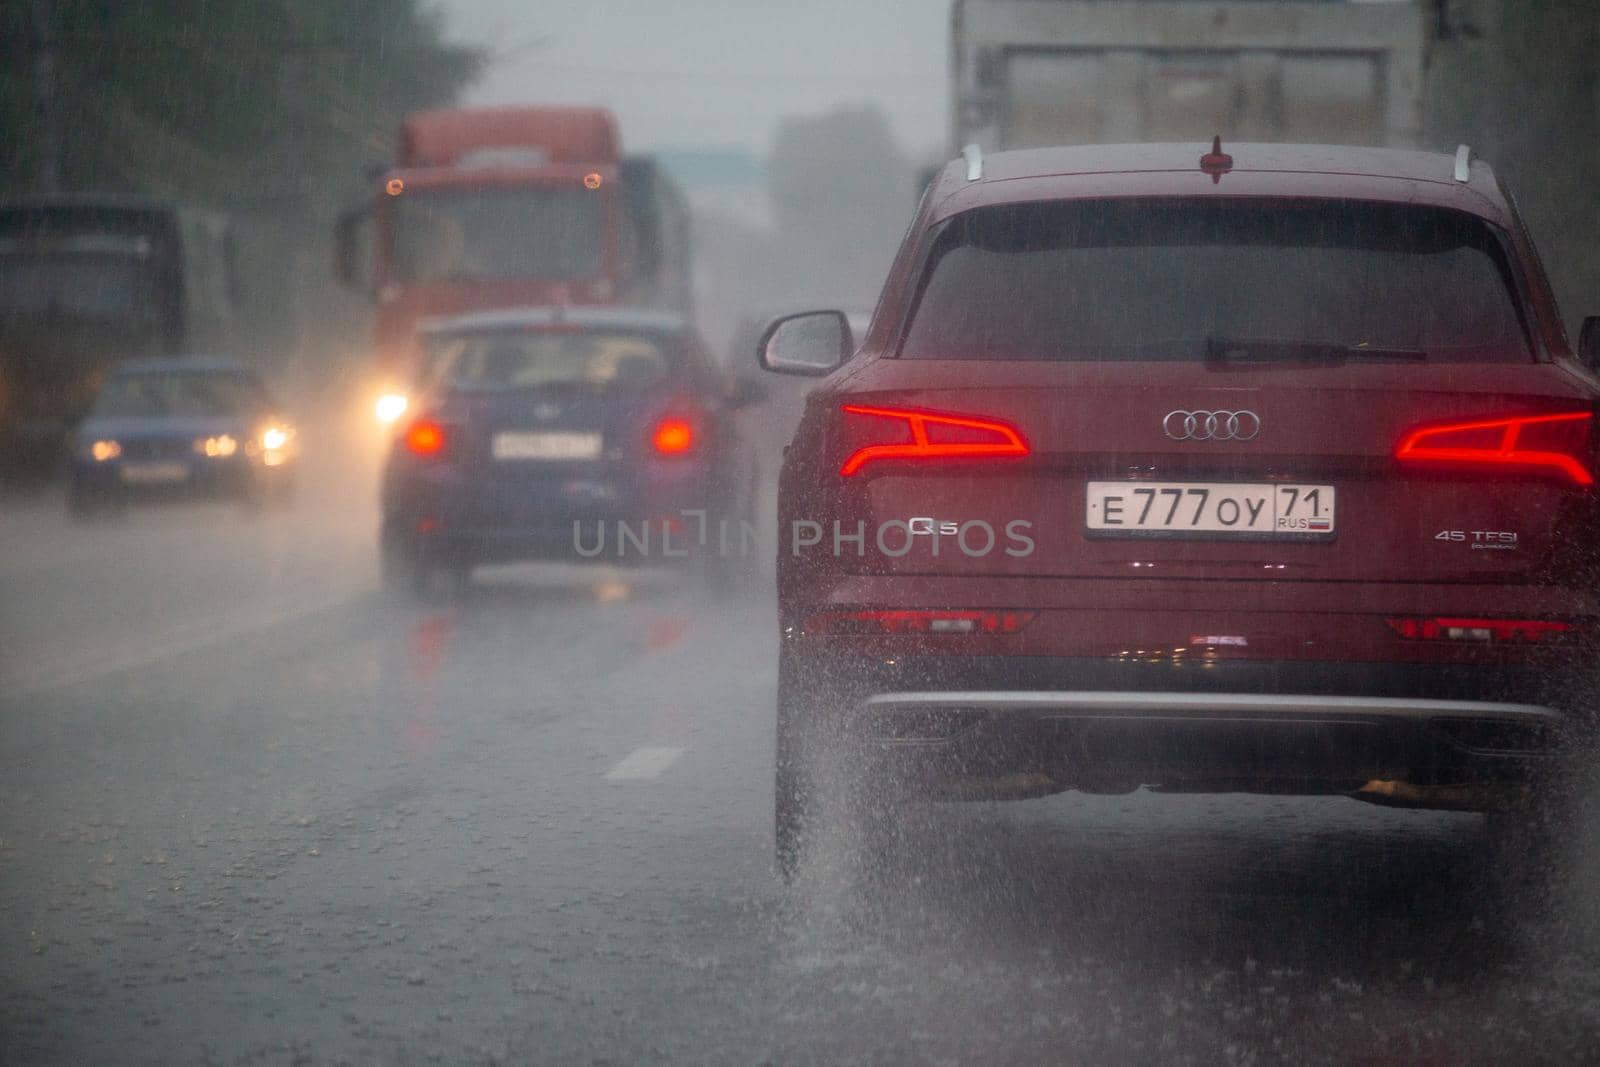 TULA, RUSSIA - JULY 14, 2020: Cars moving on asphalt road during heavy summer storm rain, back view from another car on same road. Water spraying from the wheels.